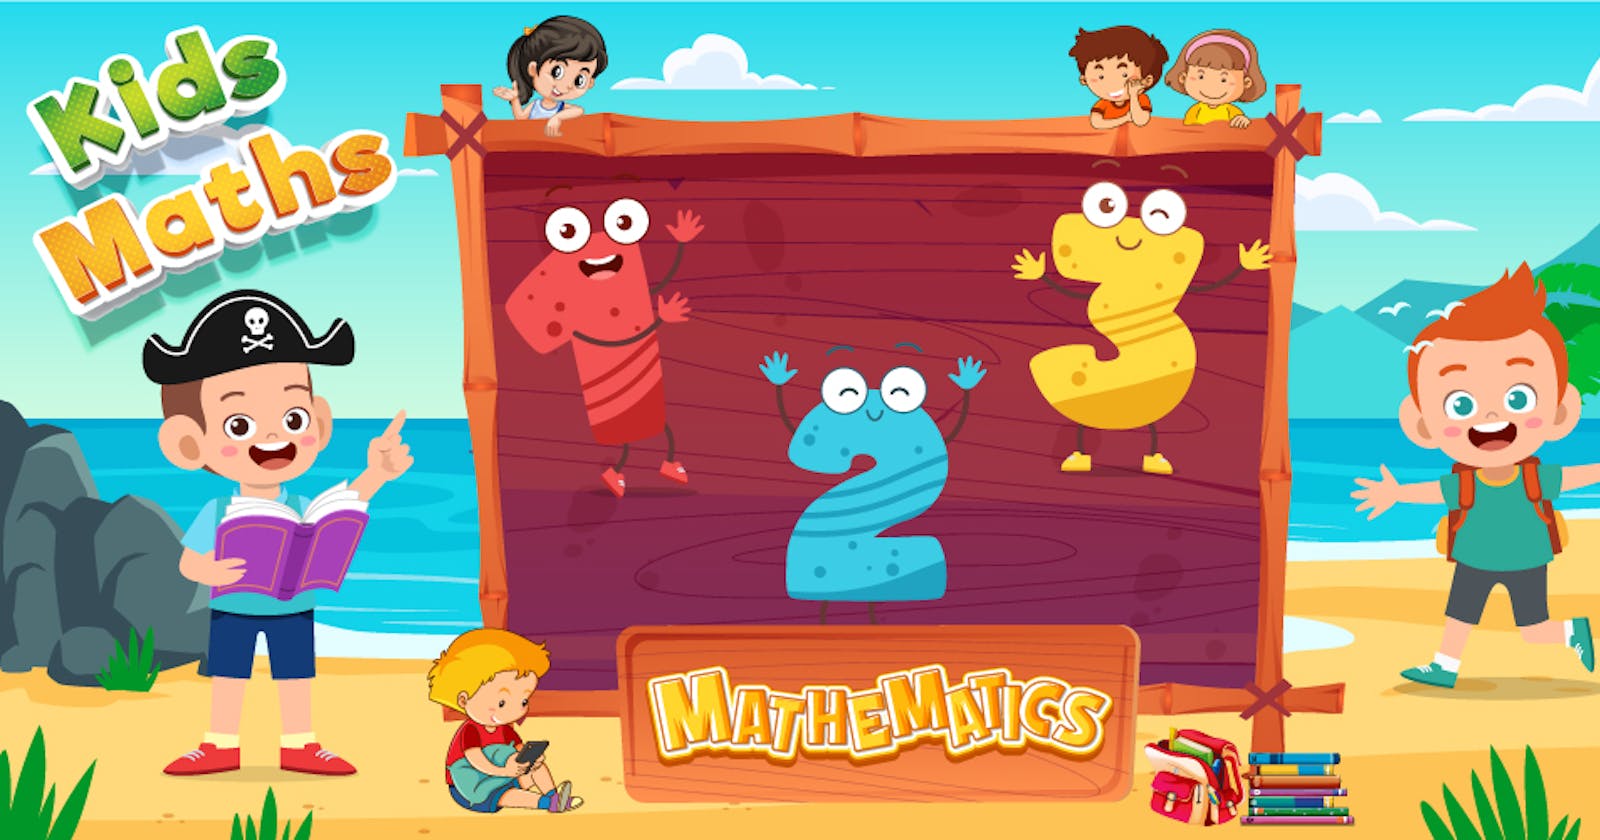 The All New Educative & Entertaining Math Learning Game For Kids!